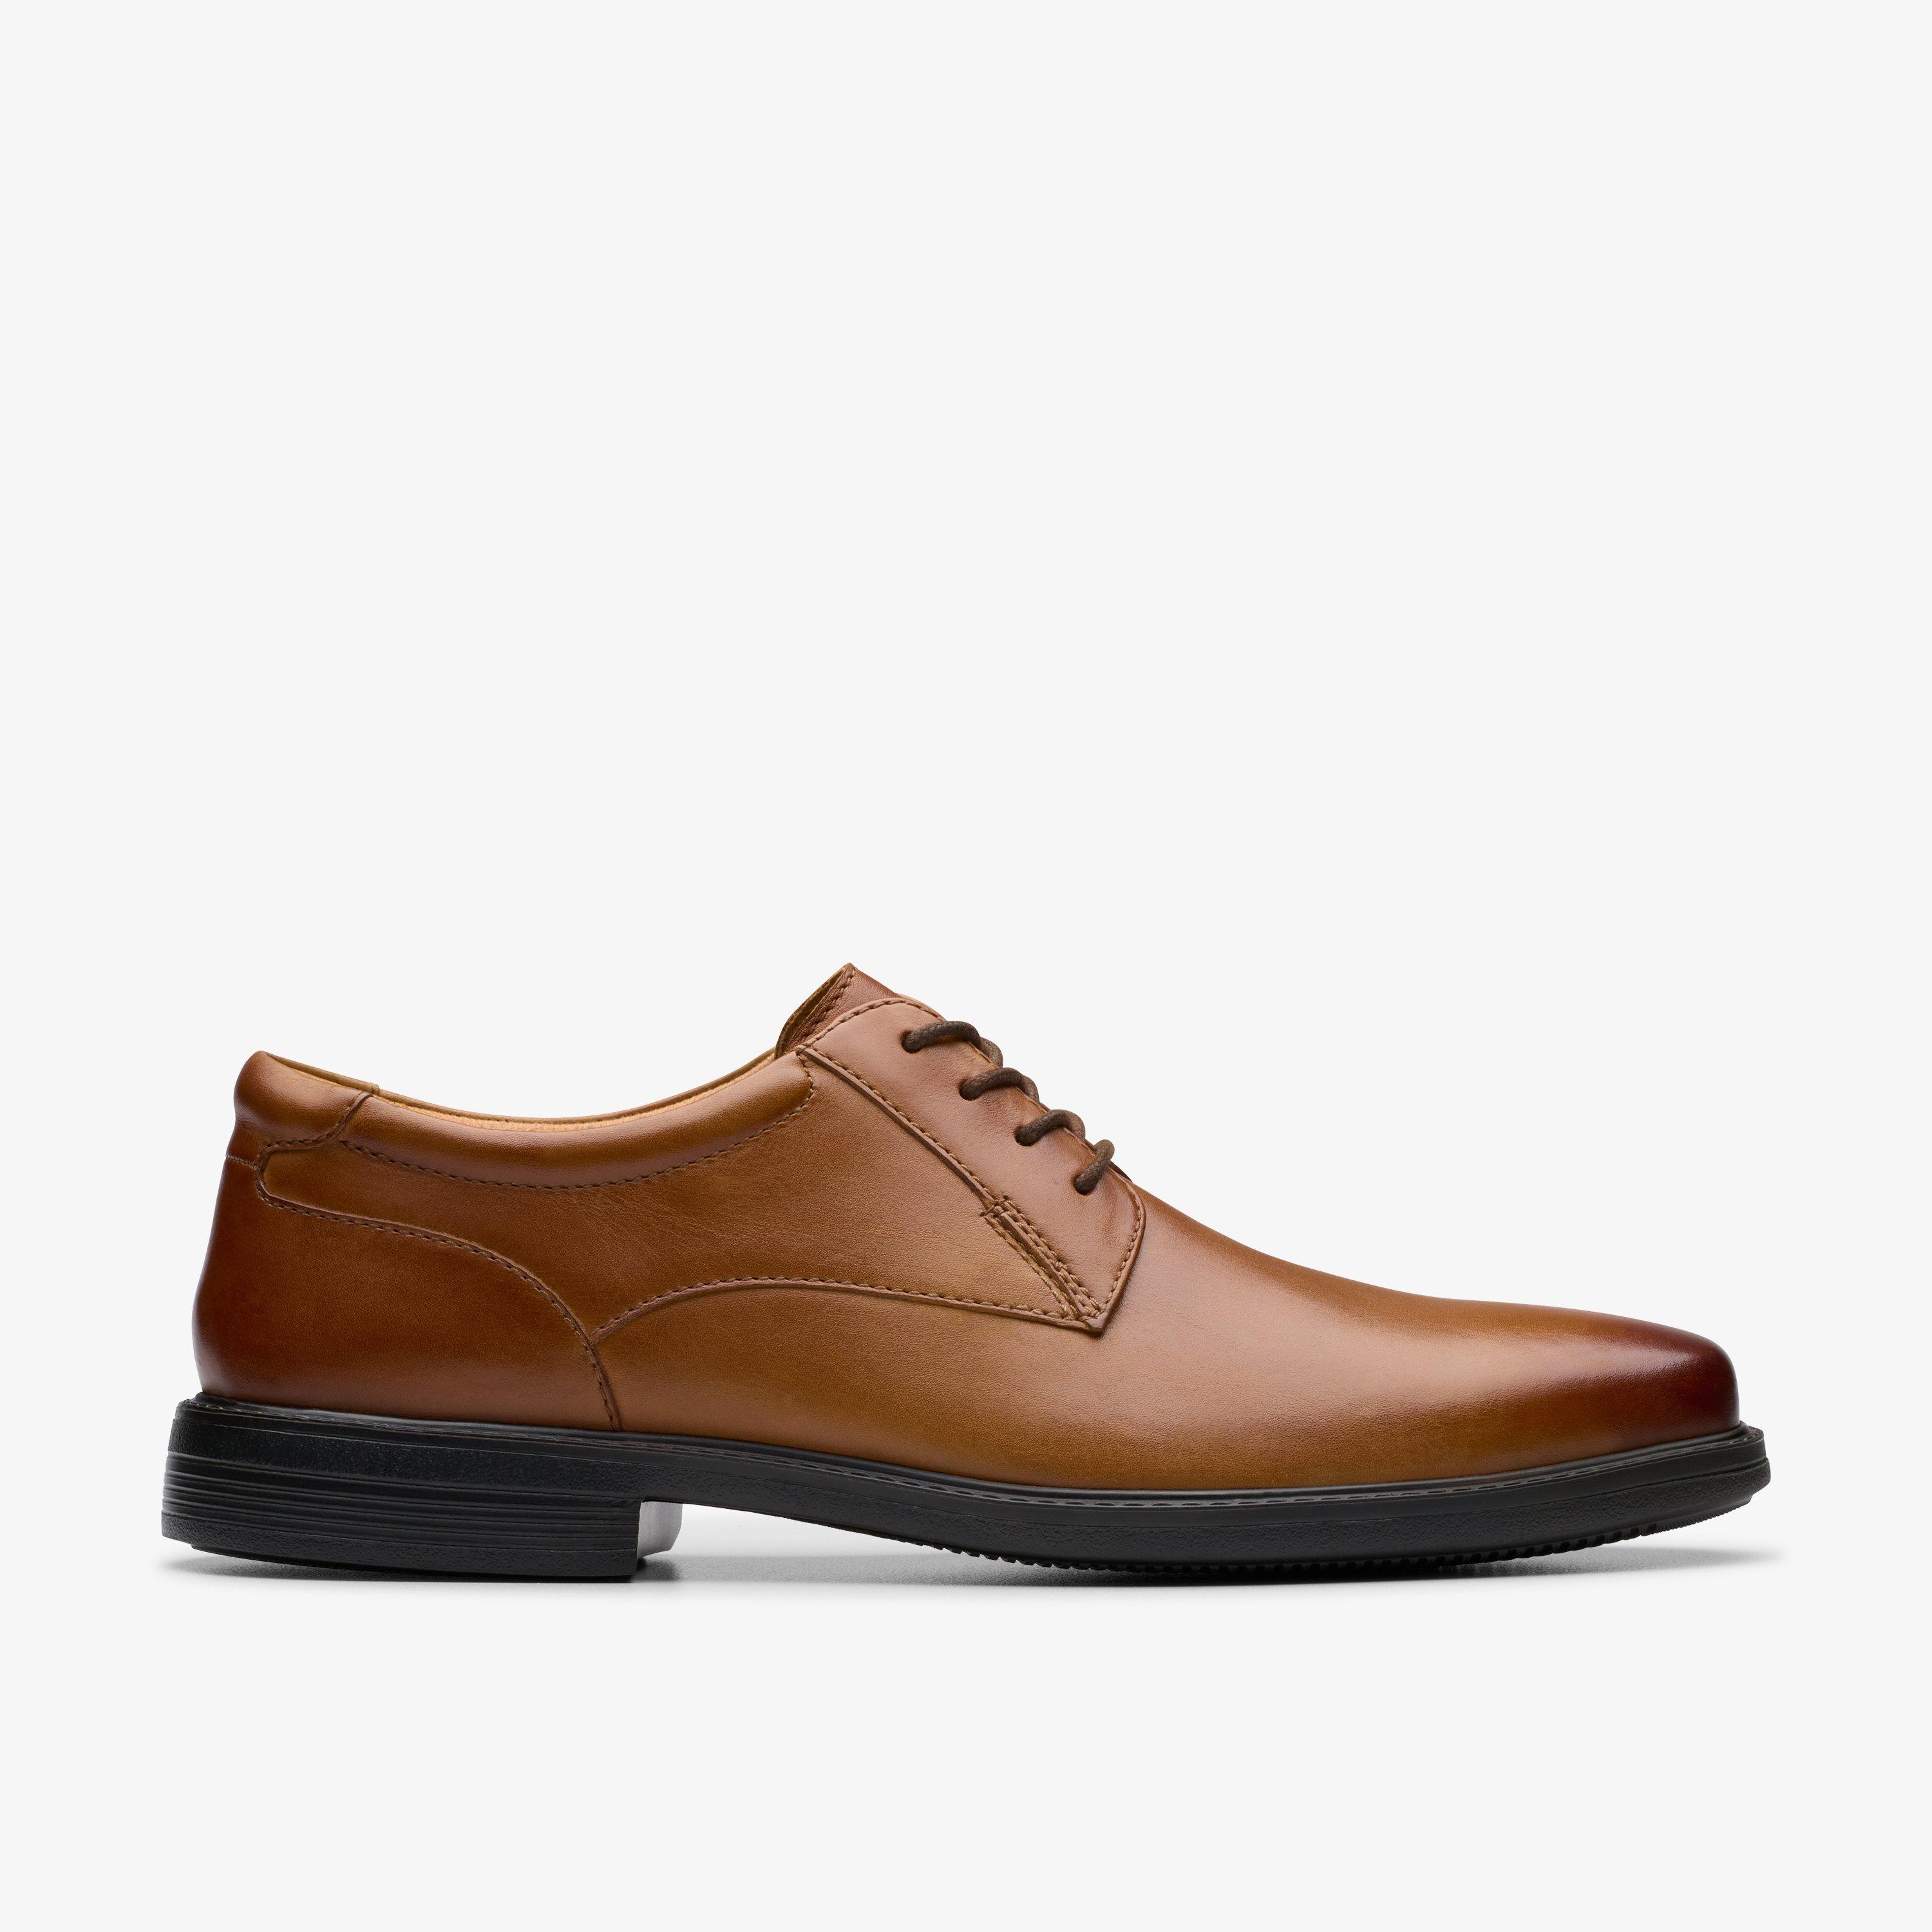 MENS WendellLaceII Tan Leather Derby Shoe | Clarks Outlet